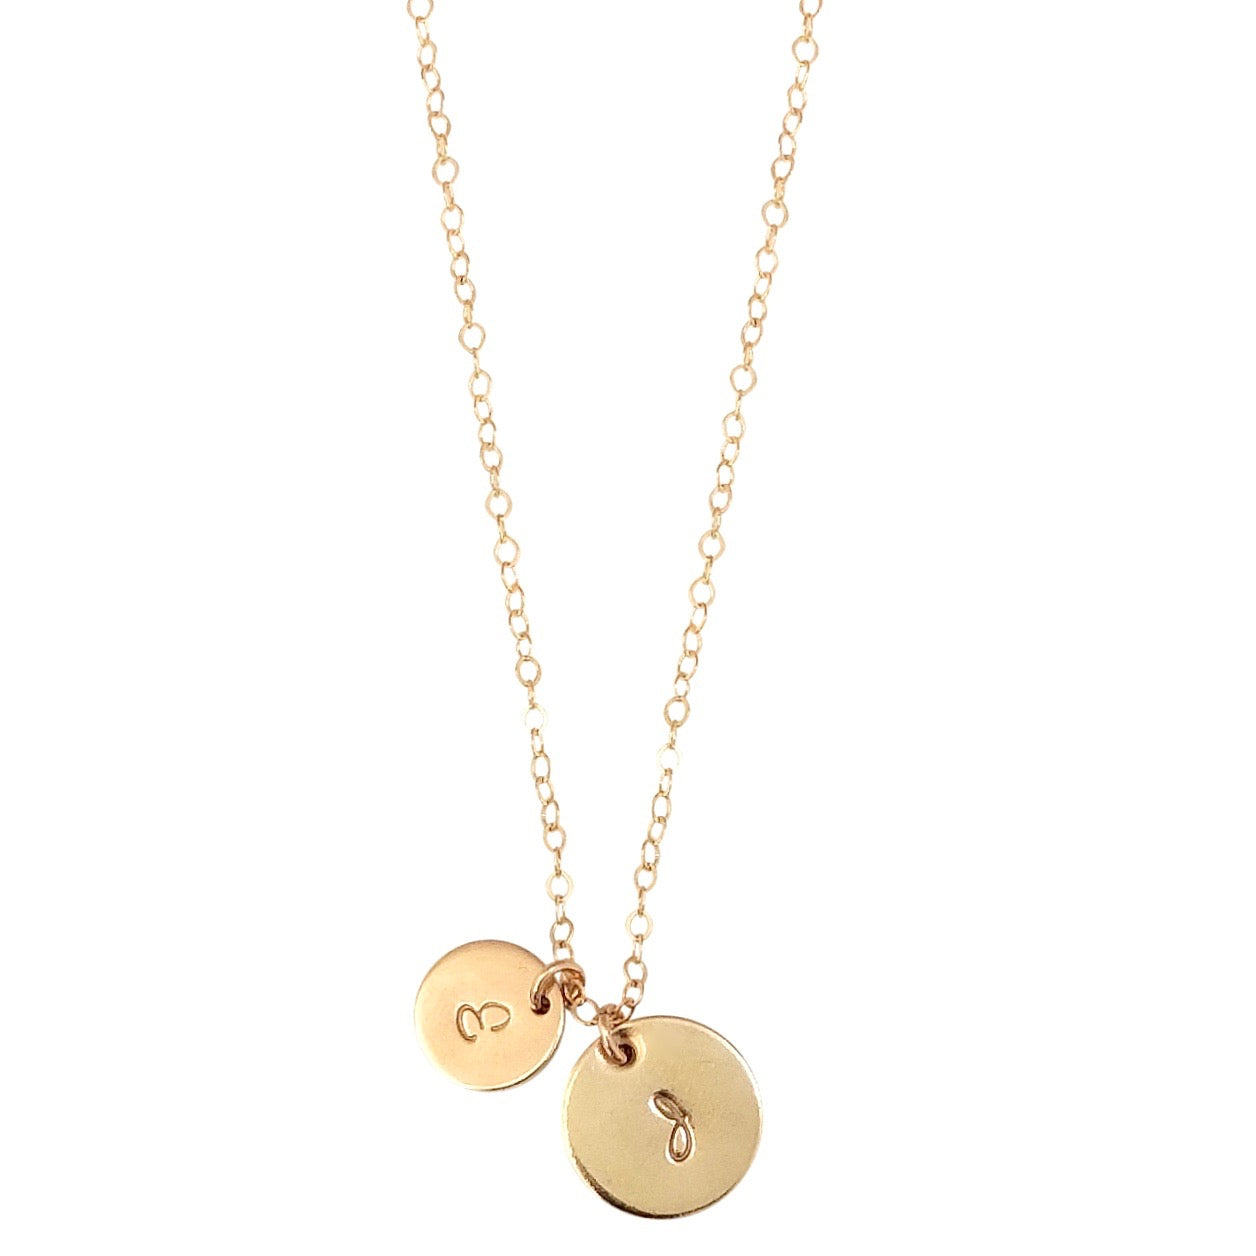 Personalised gold double disc necklace